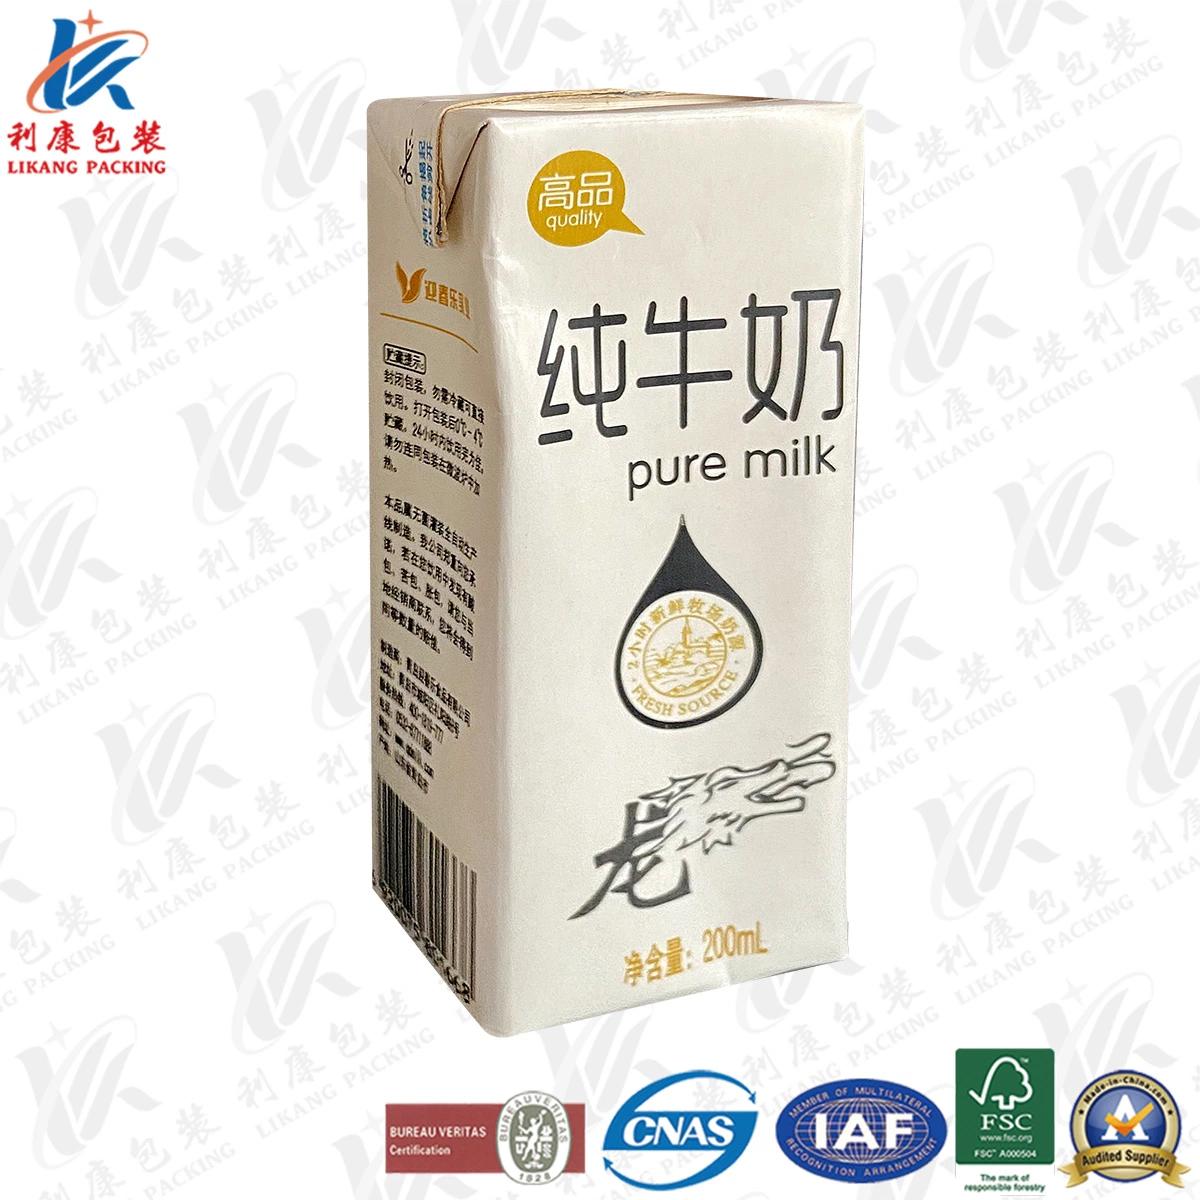 Aseptic Packaging Material in Reel; Aseptic Packaging Box; Laminated Materials Used for Aseptic Packaging; Aseptic Packaging Material for Juice and Milk